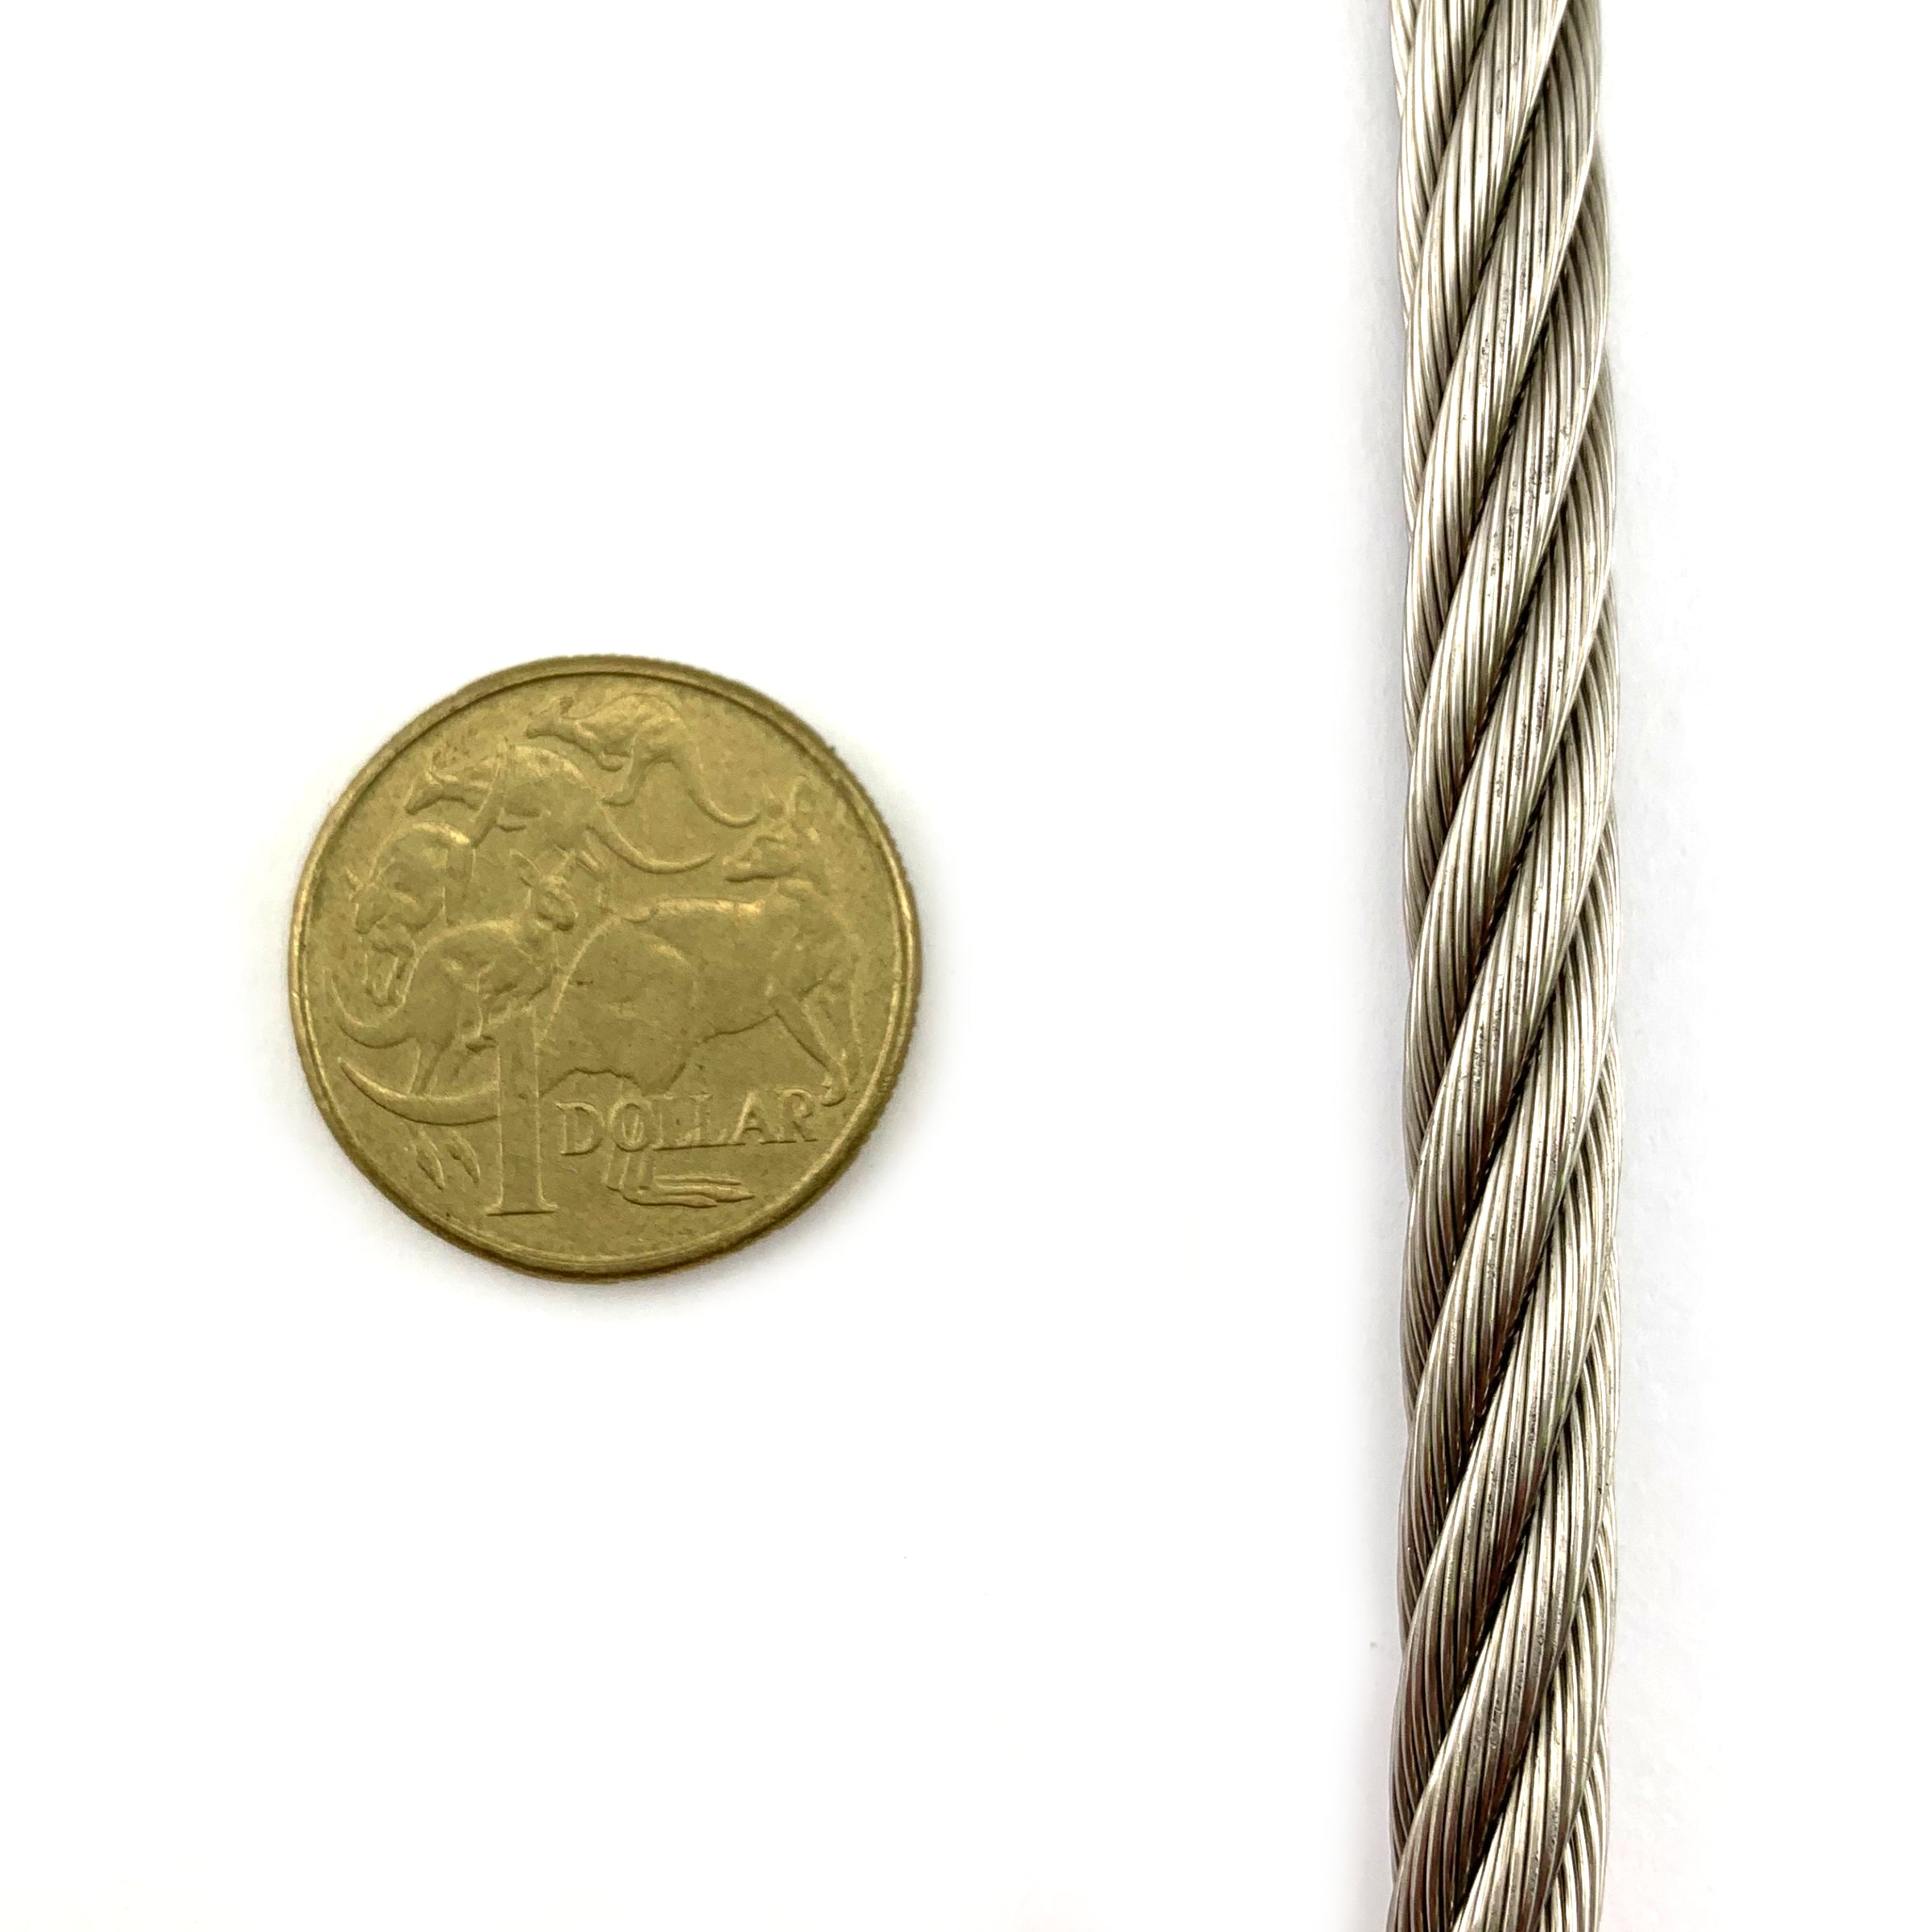 8mm (7/19 strand) stainless steel wire rope, by the metre. Australia